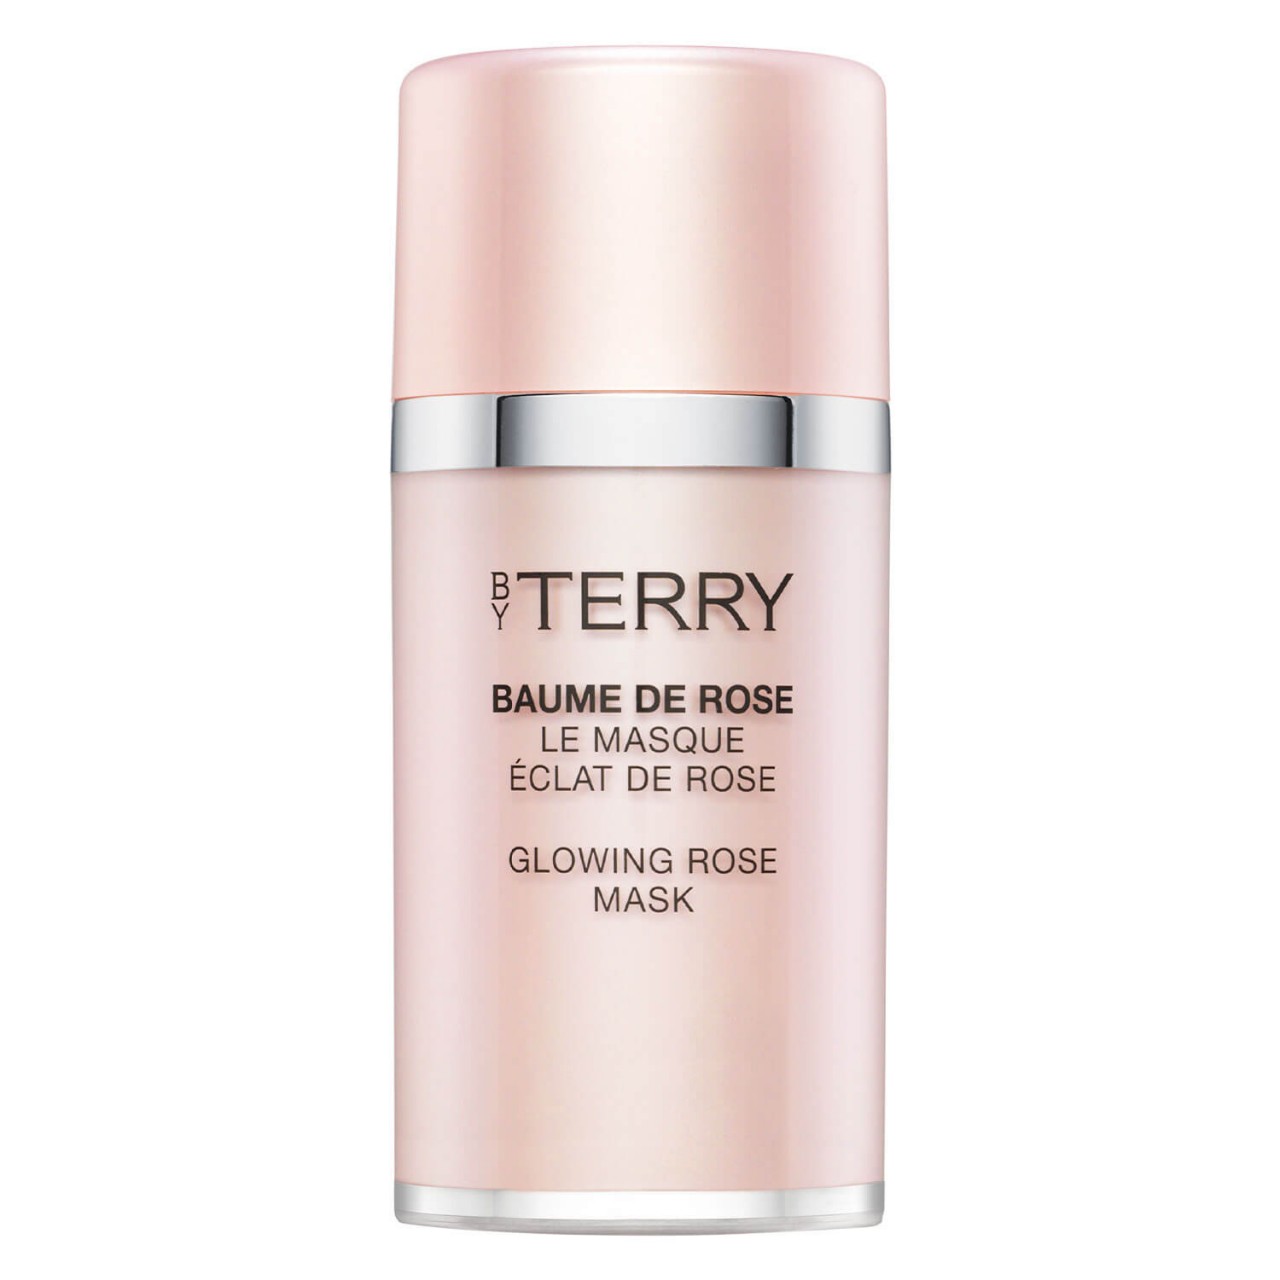 By Terry Care - Baume de Rose Glowing Mask von BY TERRY